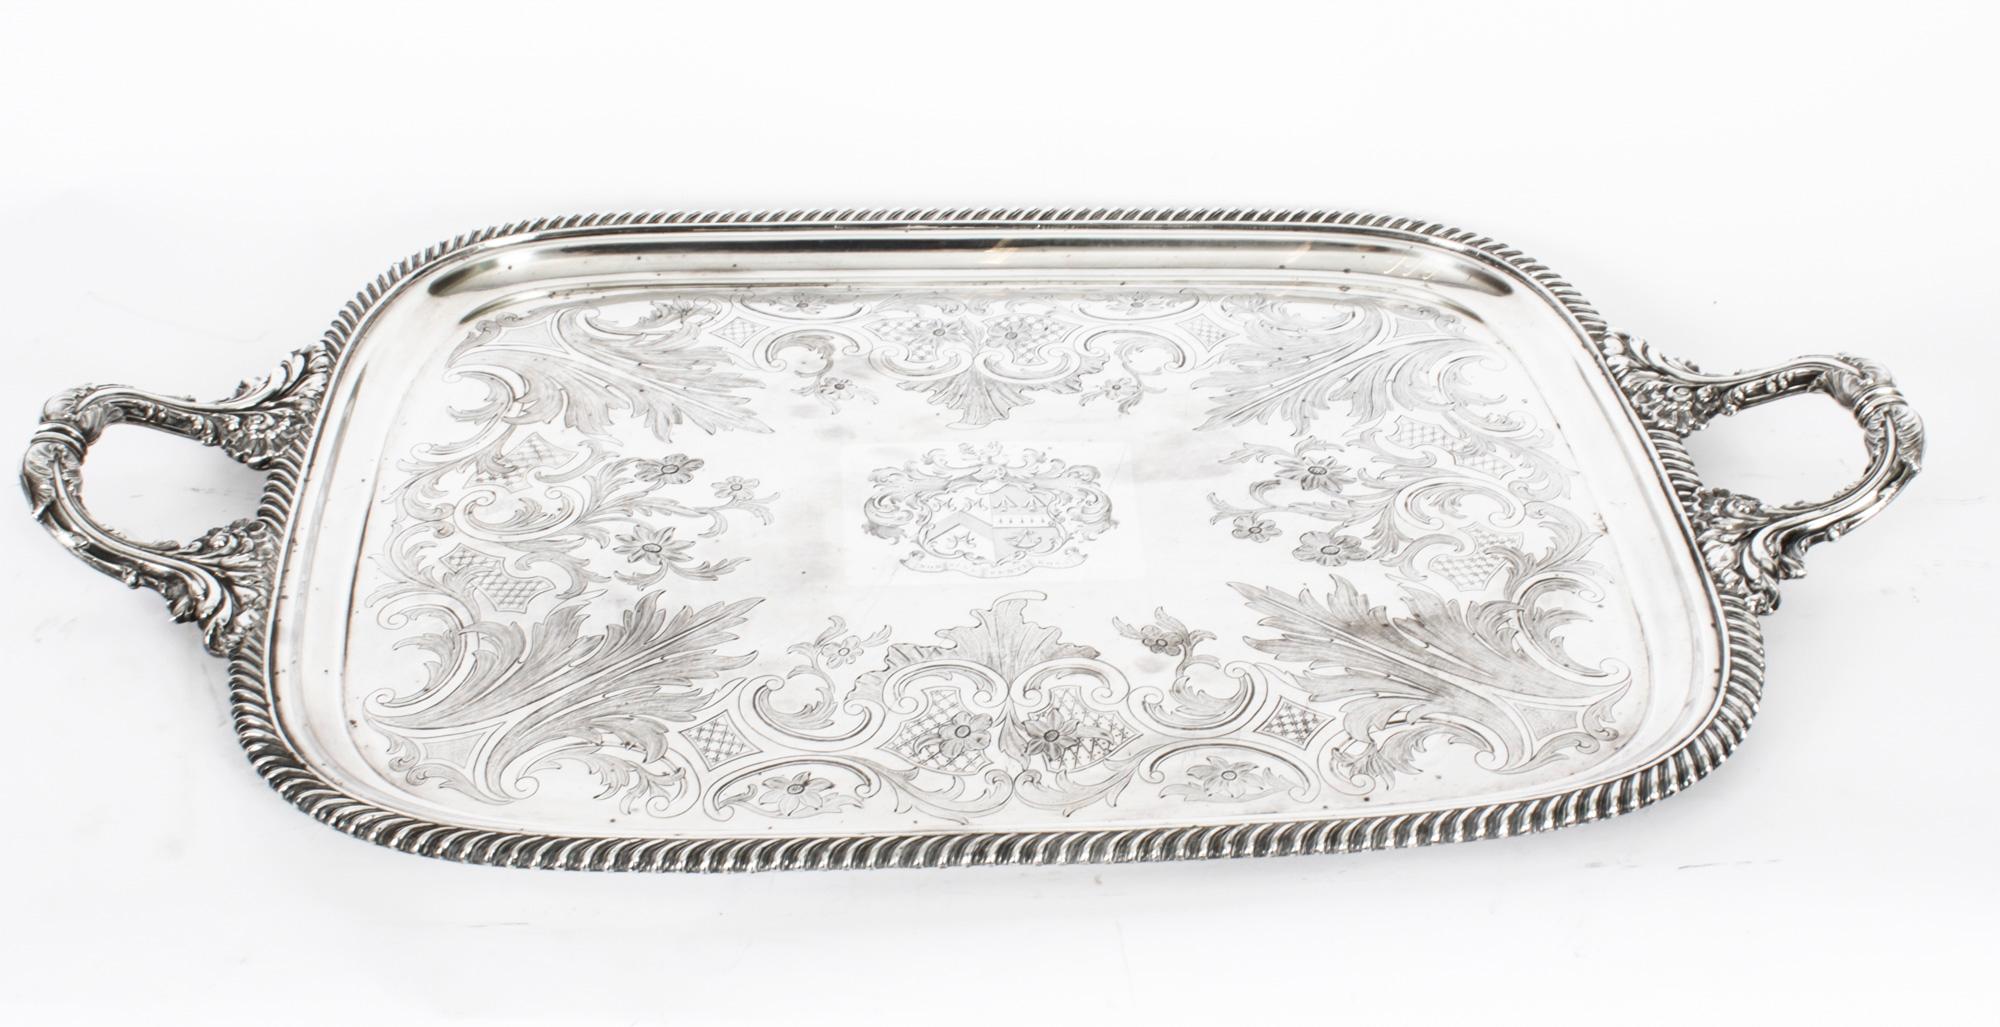 This is a lovely antique English old Sheffield silver plate tray C1790 in date.
 
This rectangular Old Shefield tray features a deep set, decorative fluted border with elegant handles decorated with acathus leaves to each end, superb foliate and